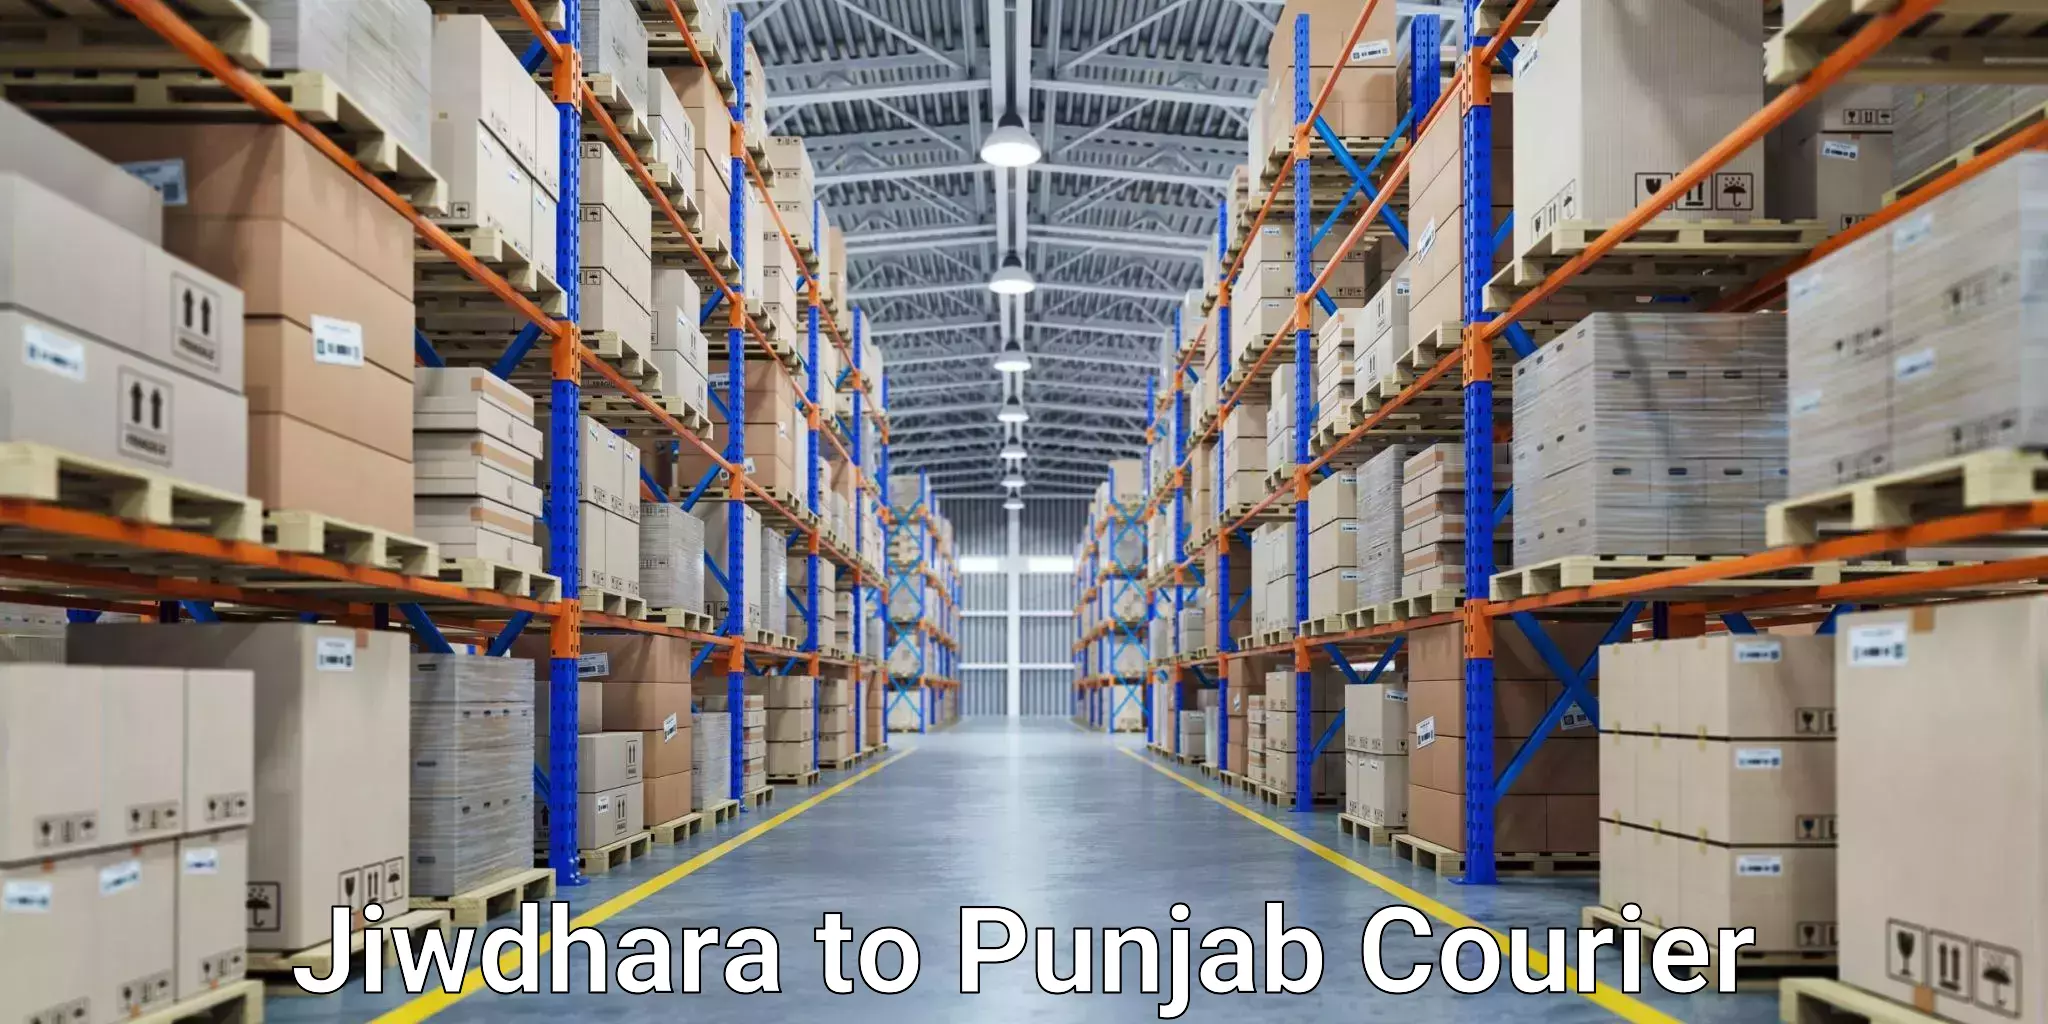 Efficient courier operations in Jiwdhara to Samana